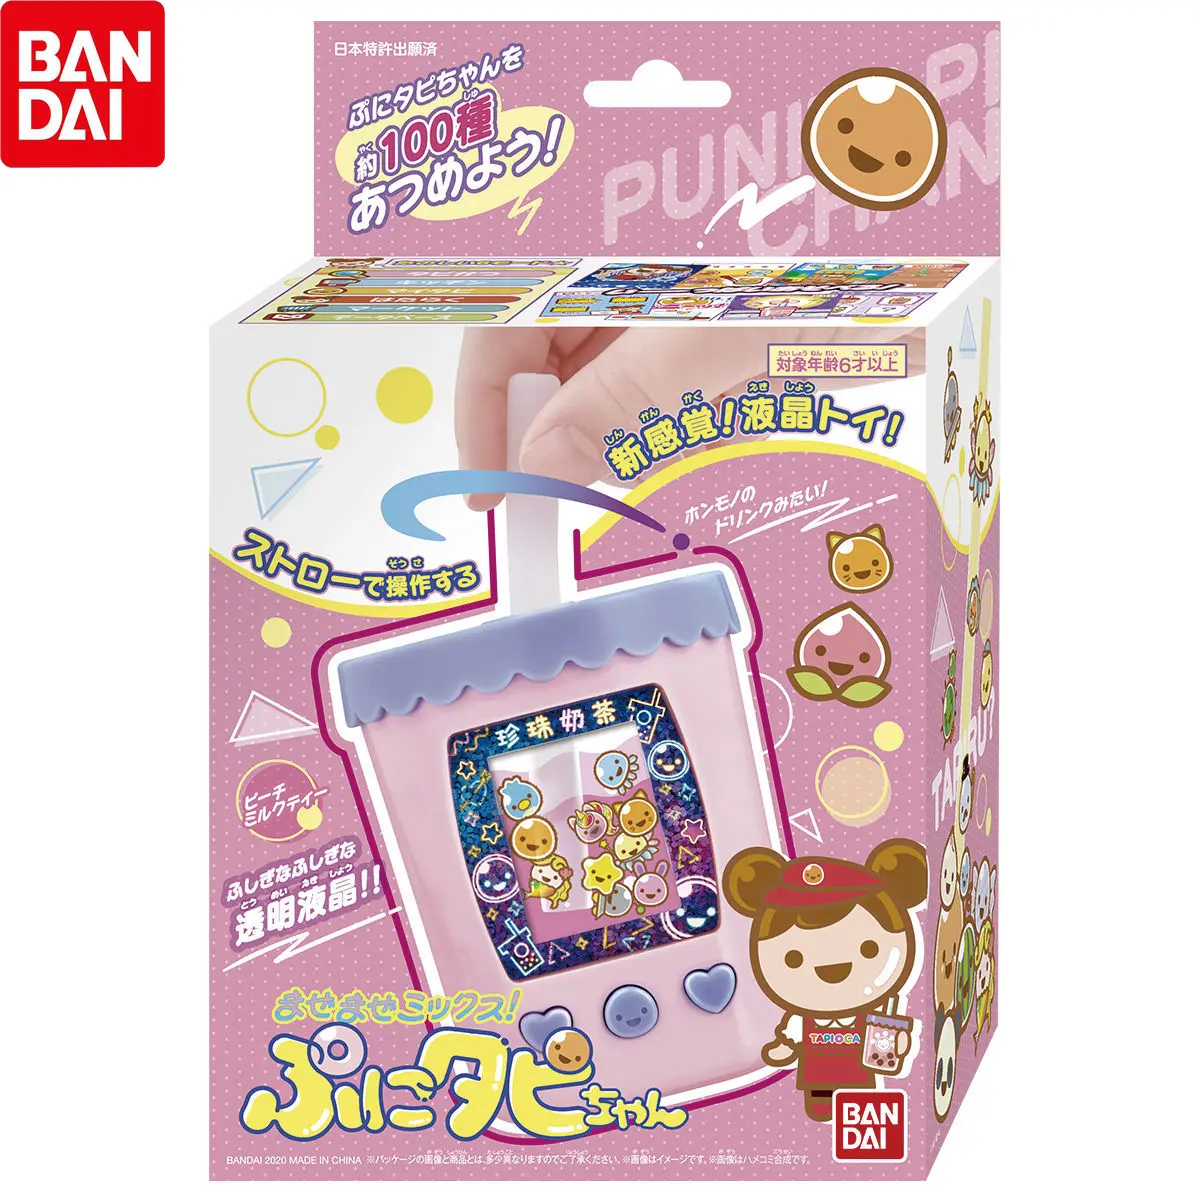 Limited Edition Japan BANDAI Bubble Tea Drinks Nostalgic Game Console Kawaii Kids Gift Toy Game Collection